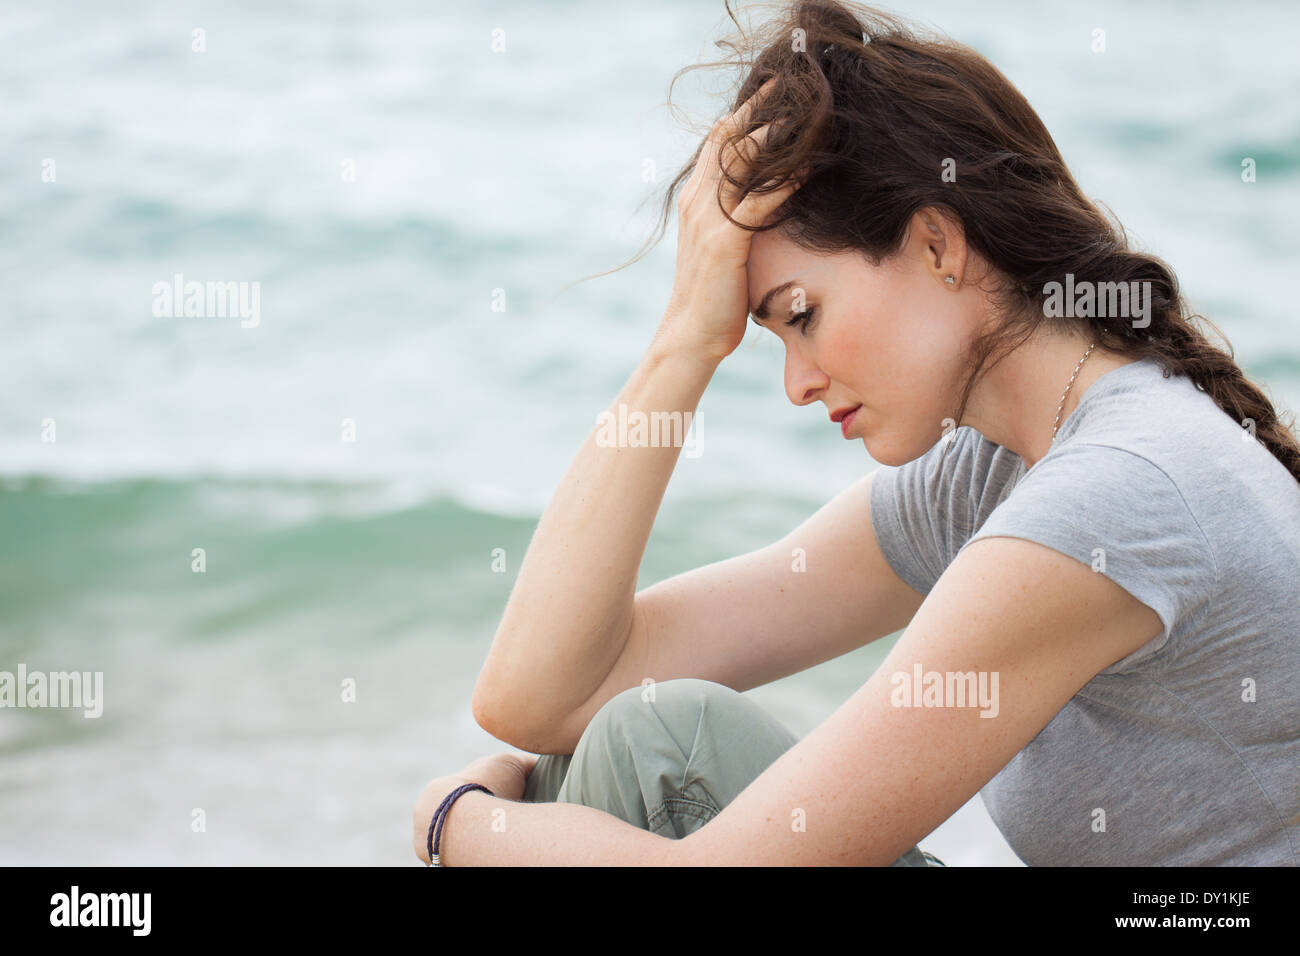 https://c8.alamy.com/comp/DY1KJE/close-up-of-a-sad-and-depressed-woman-deep-in-thought-outdoors-DY1KJE.jpg